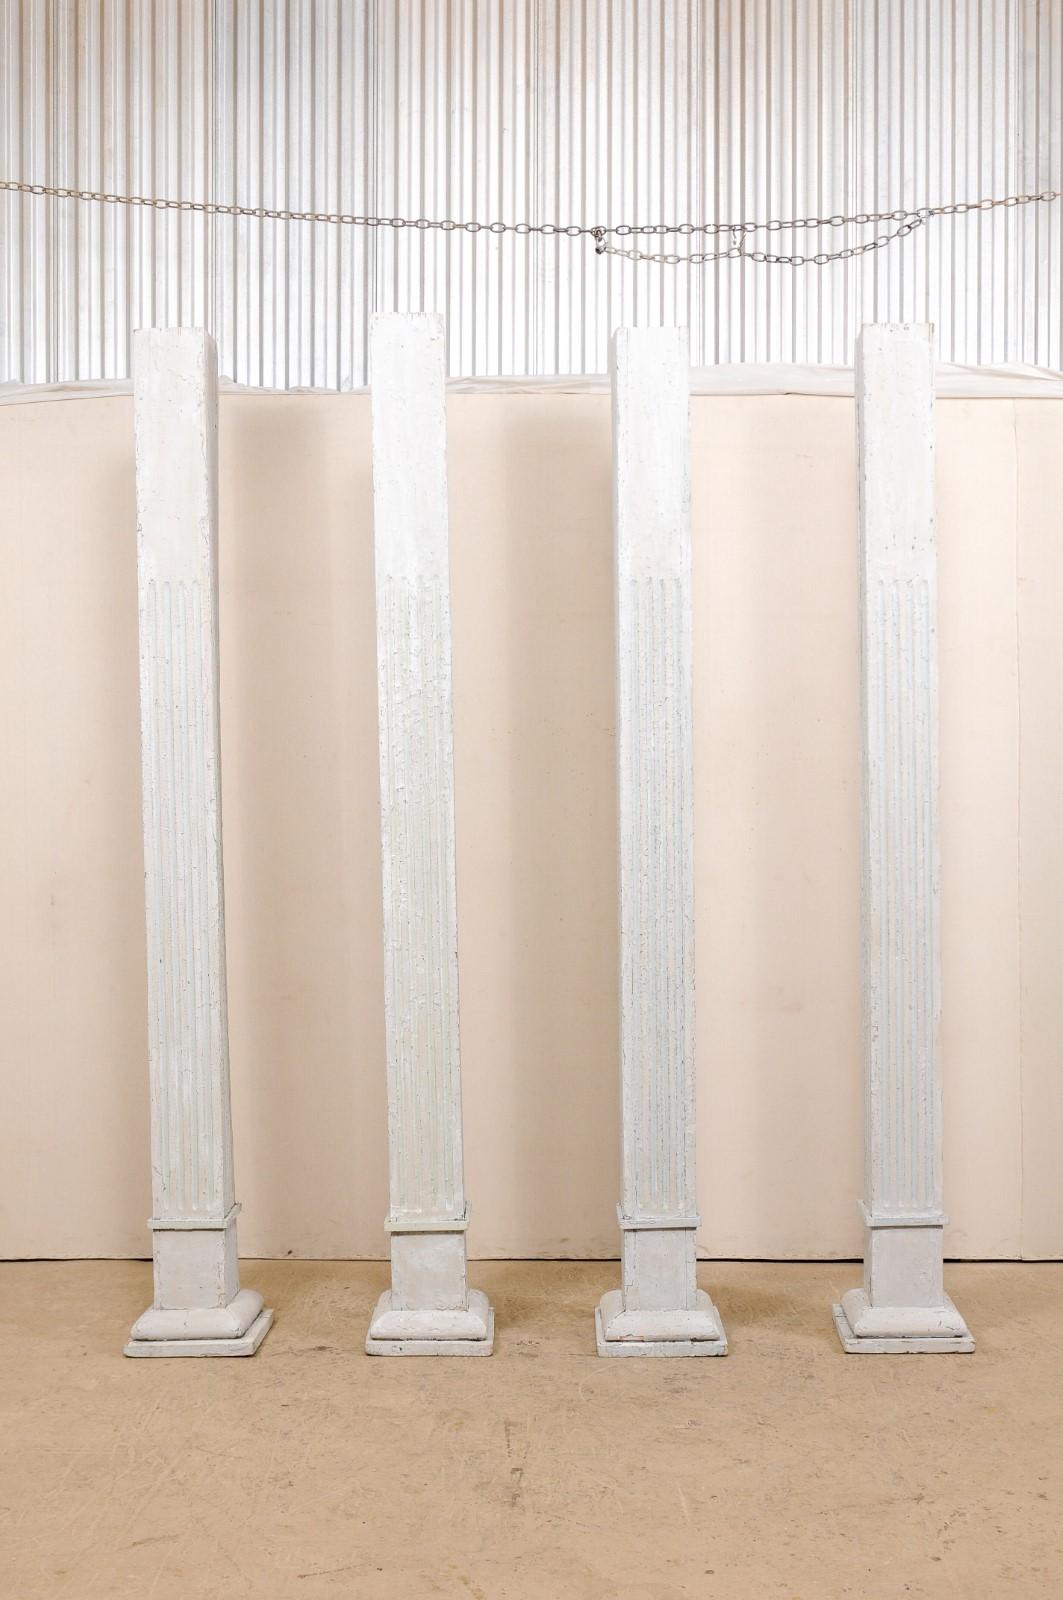 A tall set of four 19th century painted wood columns. This set of antique American pillars, standing over 8.5 feet in height, have square-shaped bodies with carved fluting, and are raised upon graduated and square-shaped bases. The columns are